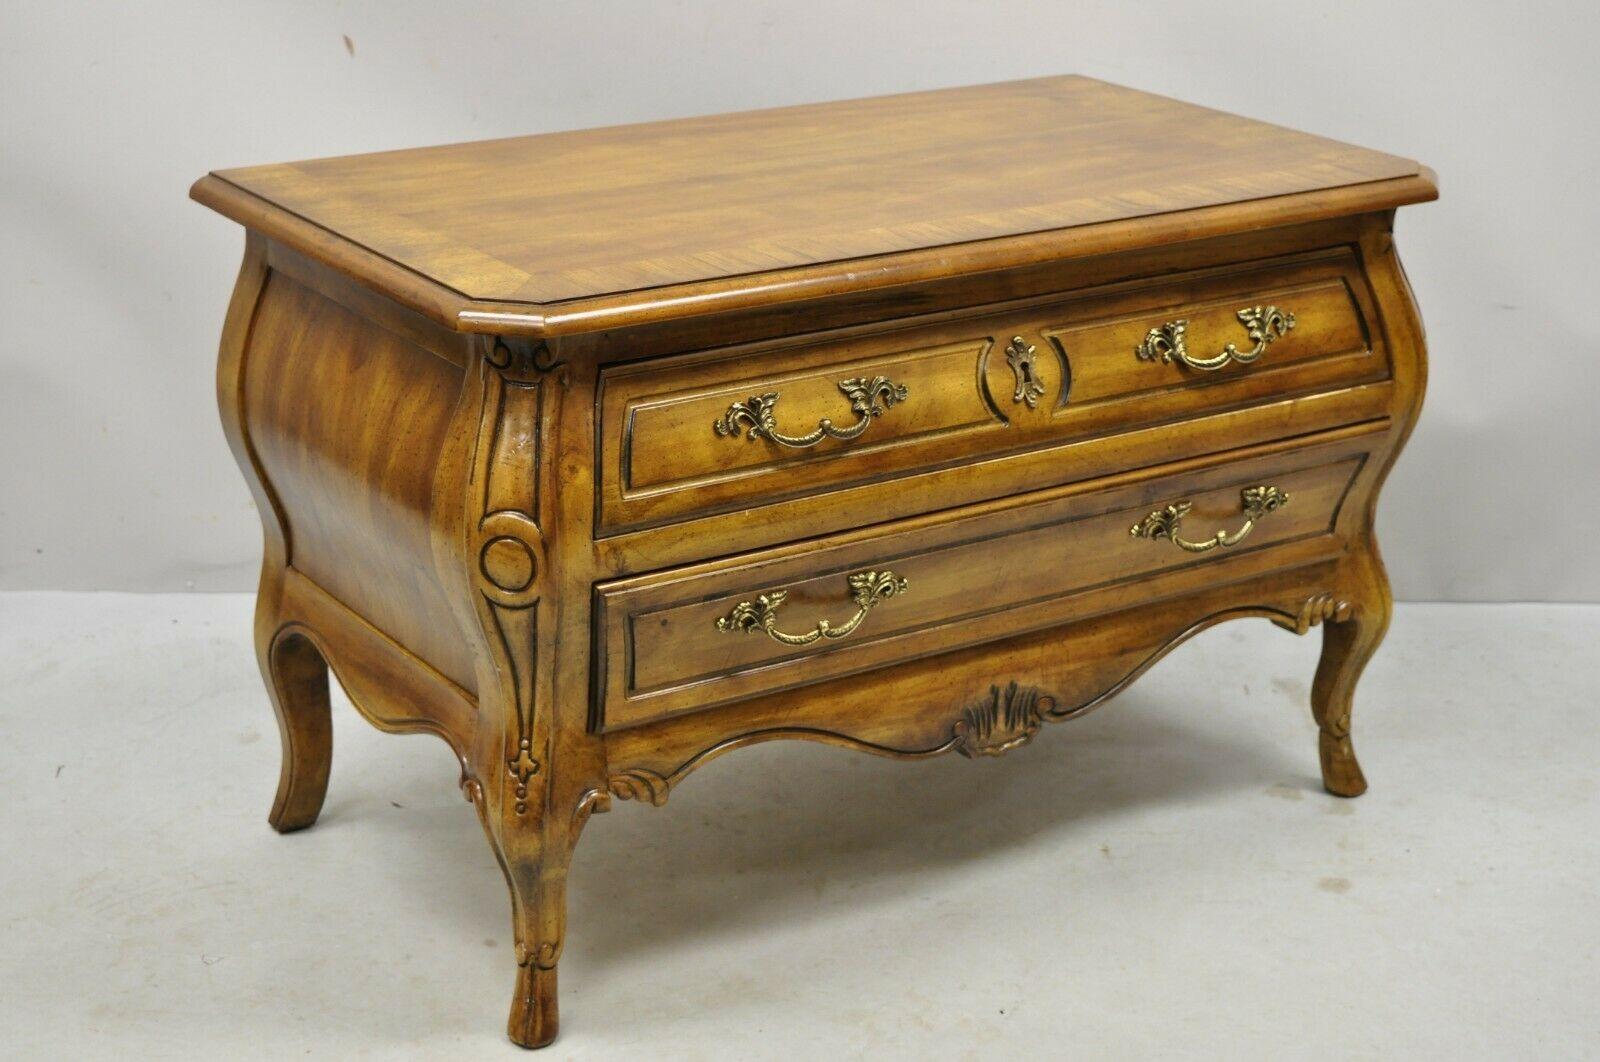 Drexel Heritage French Provincial fruitwood bombe low commode nightstand. Item features a banded top, solid wood construction, beautiful wood grain, nicely carved details, 2 dovetailed drawers, solid brass hardware, quality American craftsmanship,